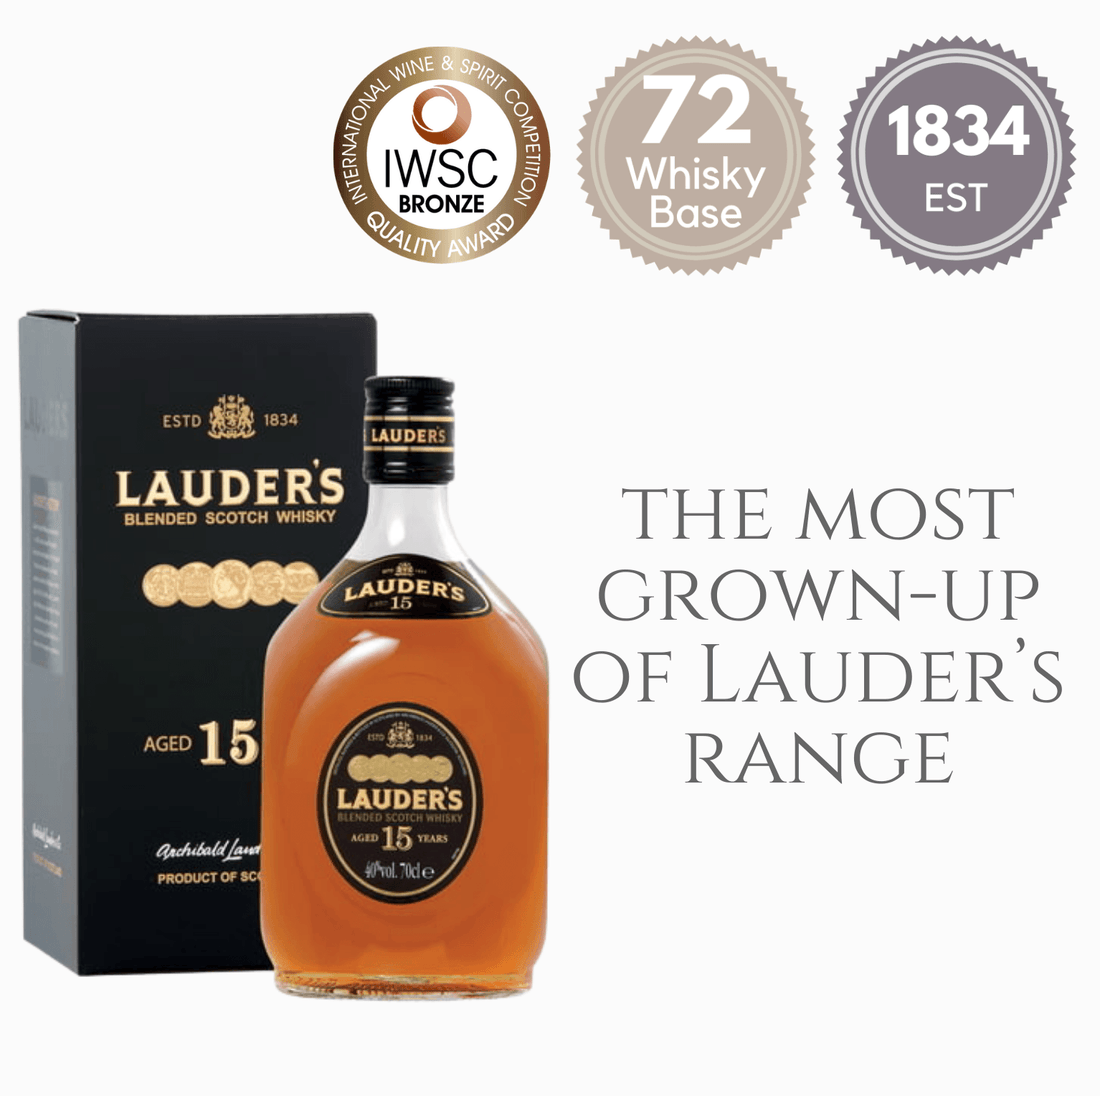 Lauders Blended Scotch Whiskey 1L